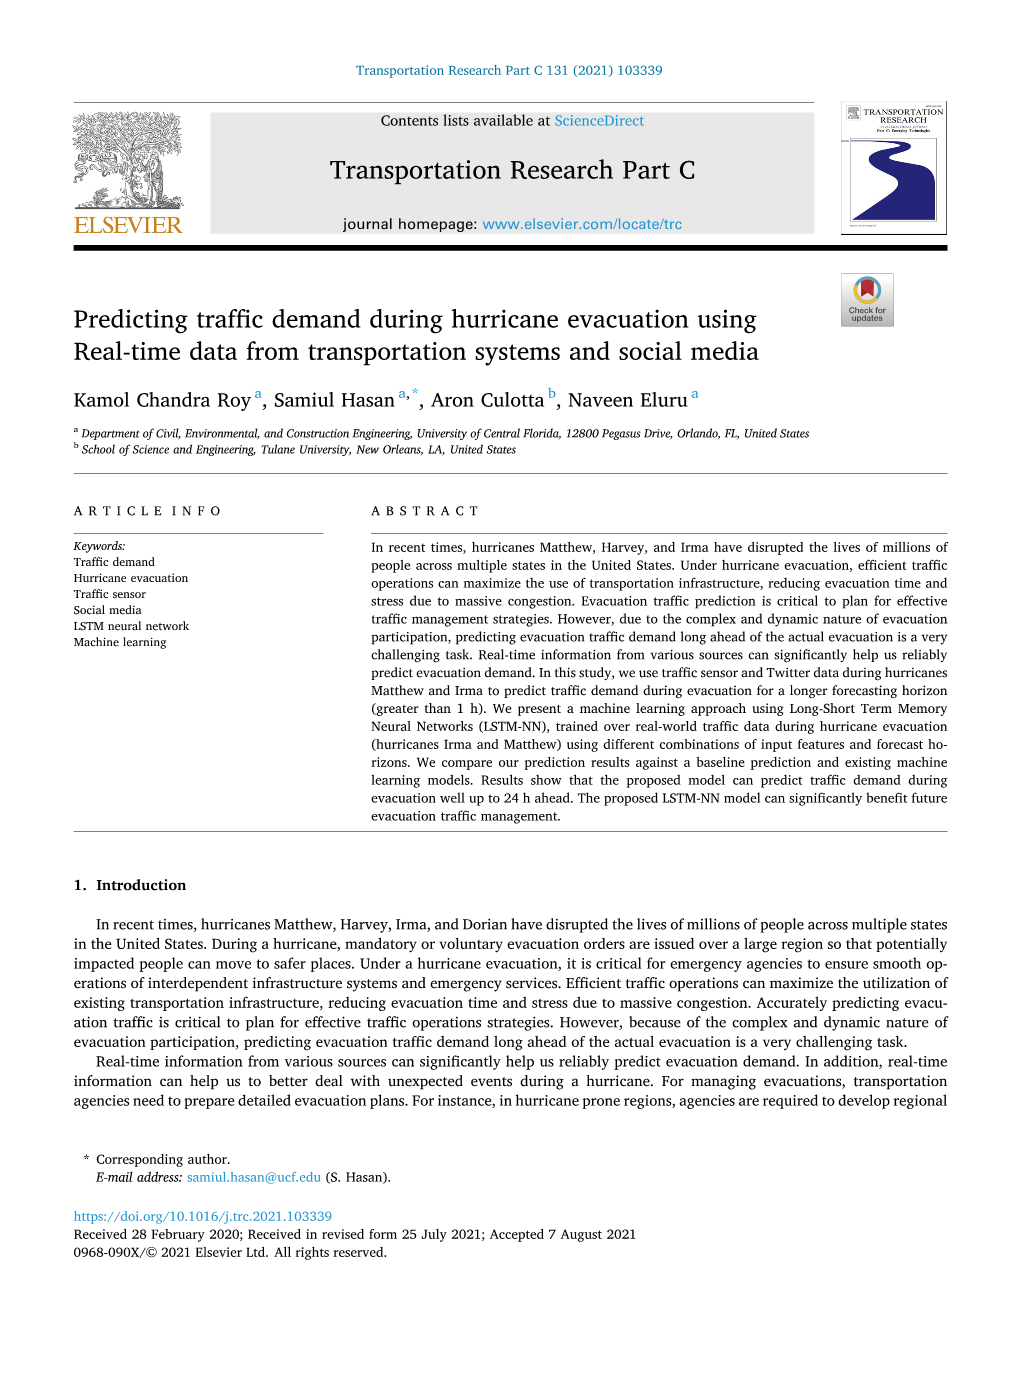 Predicting Traffic Demand During Hurricane Evacuation Using Real-Time Data from Transportation Systems and Social Media